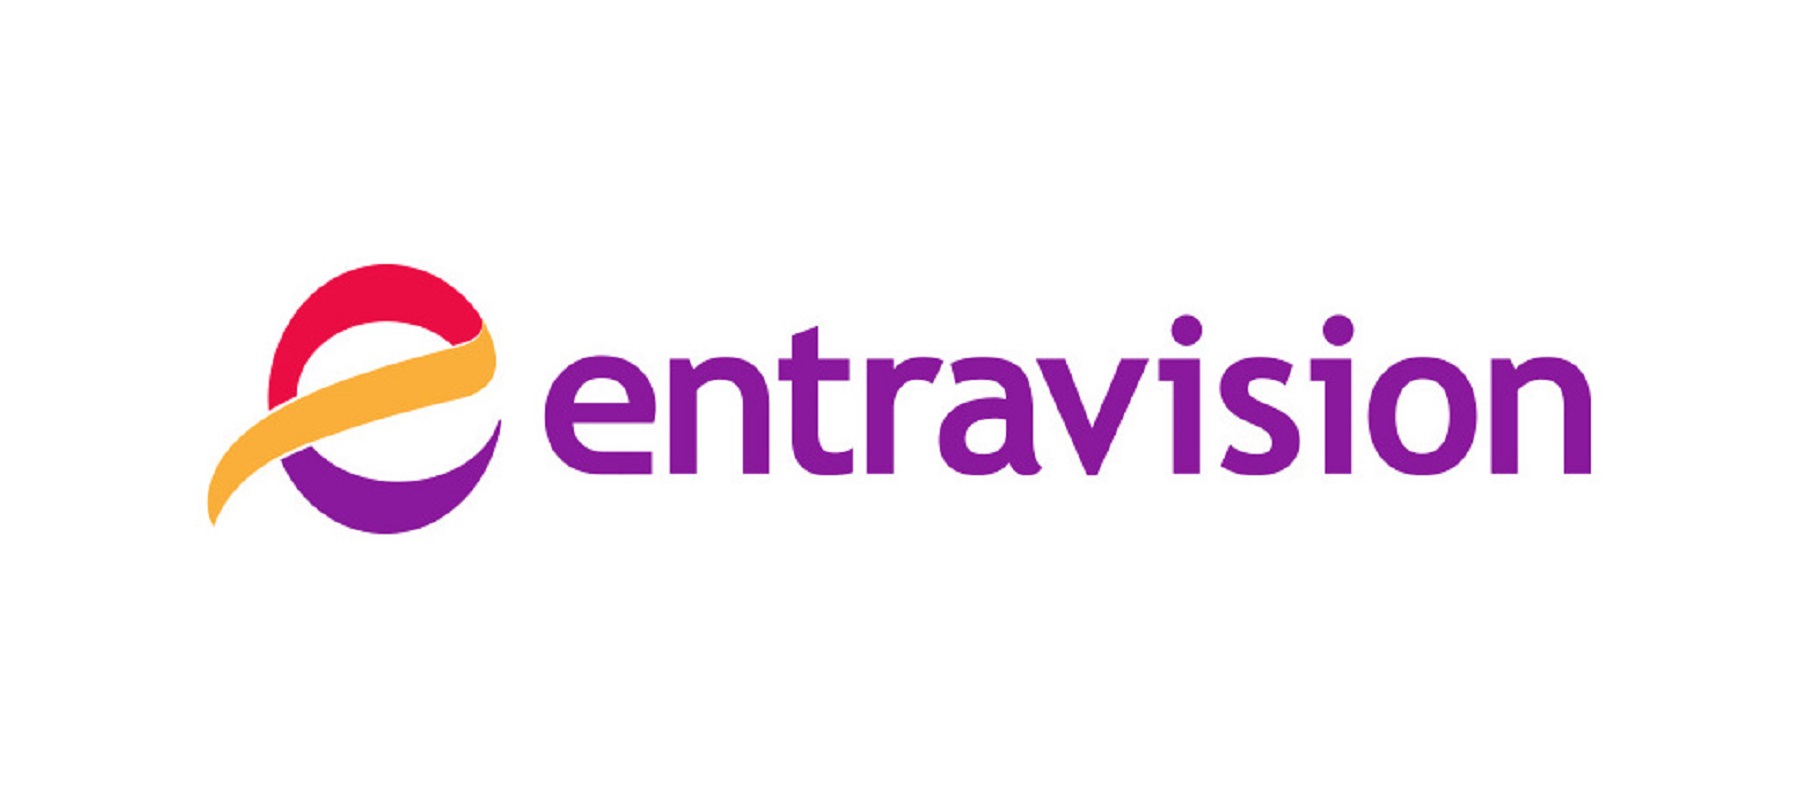 Entravision and Snap Inc. enter into a strategic sales partnership in APAC